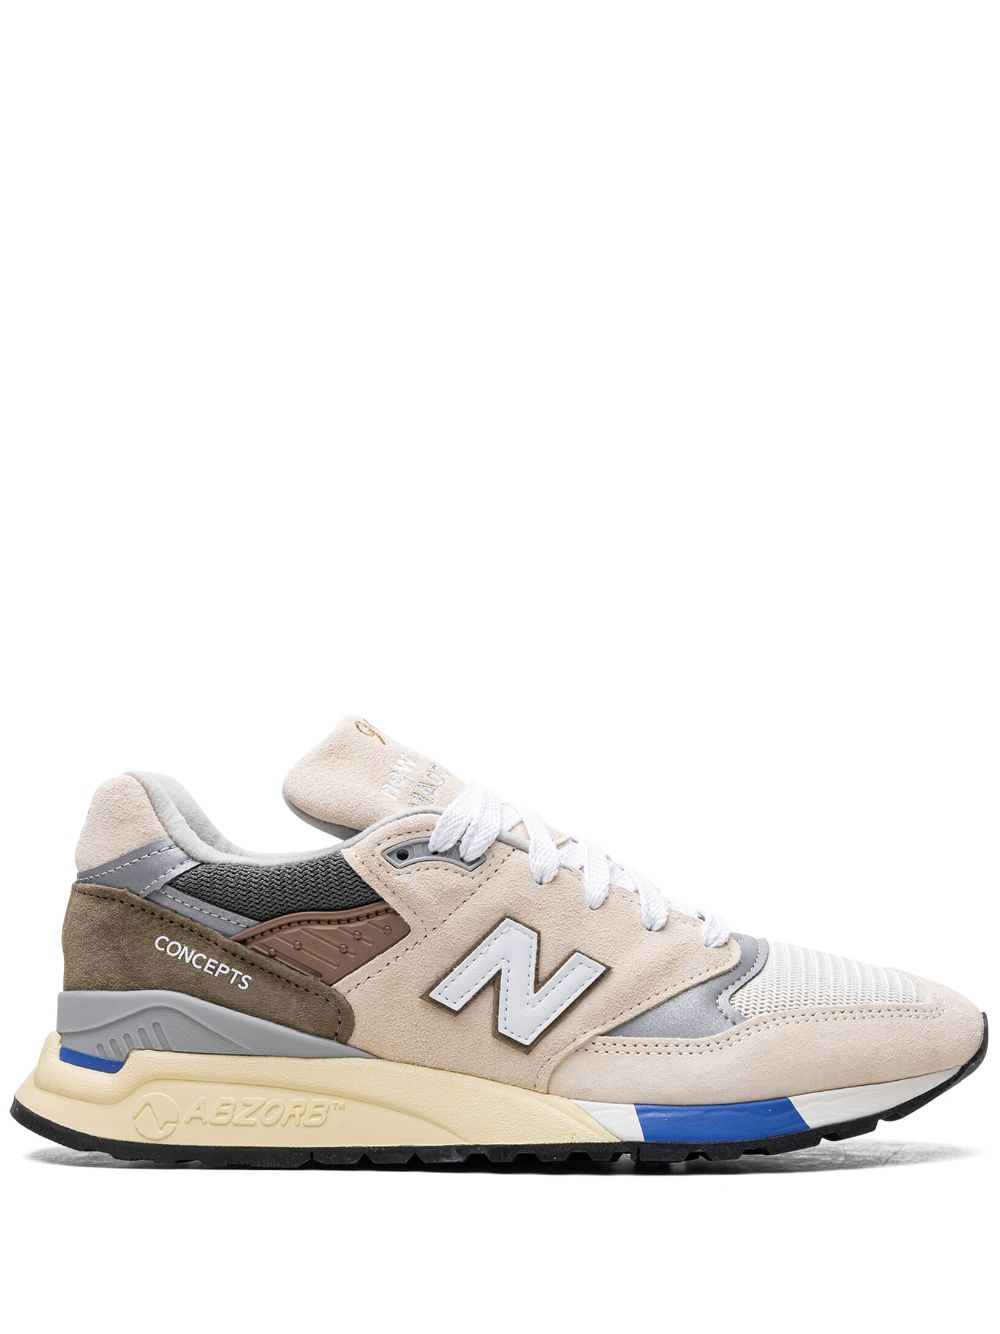 New Balance x Concepts 998 "C-Note" sneakers - Neutrals